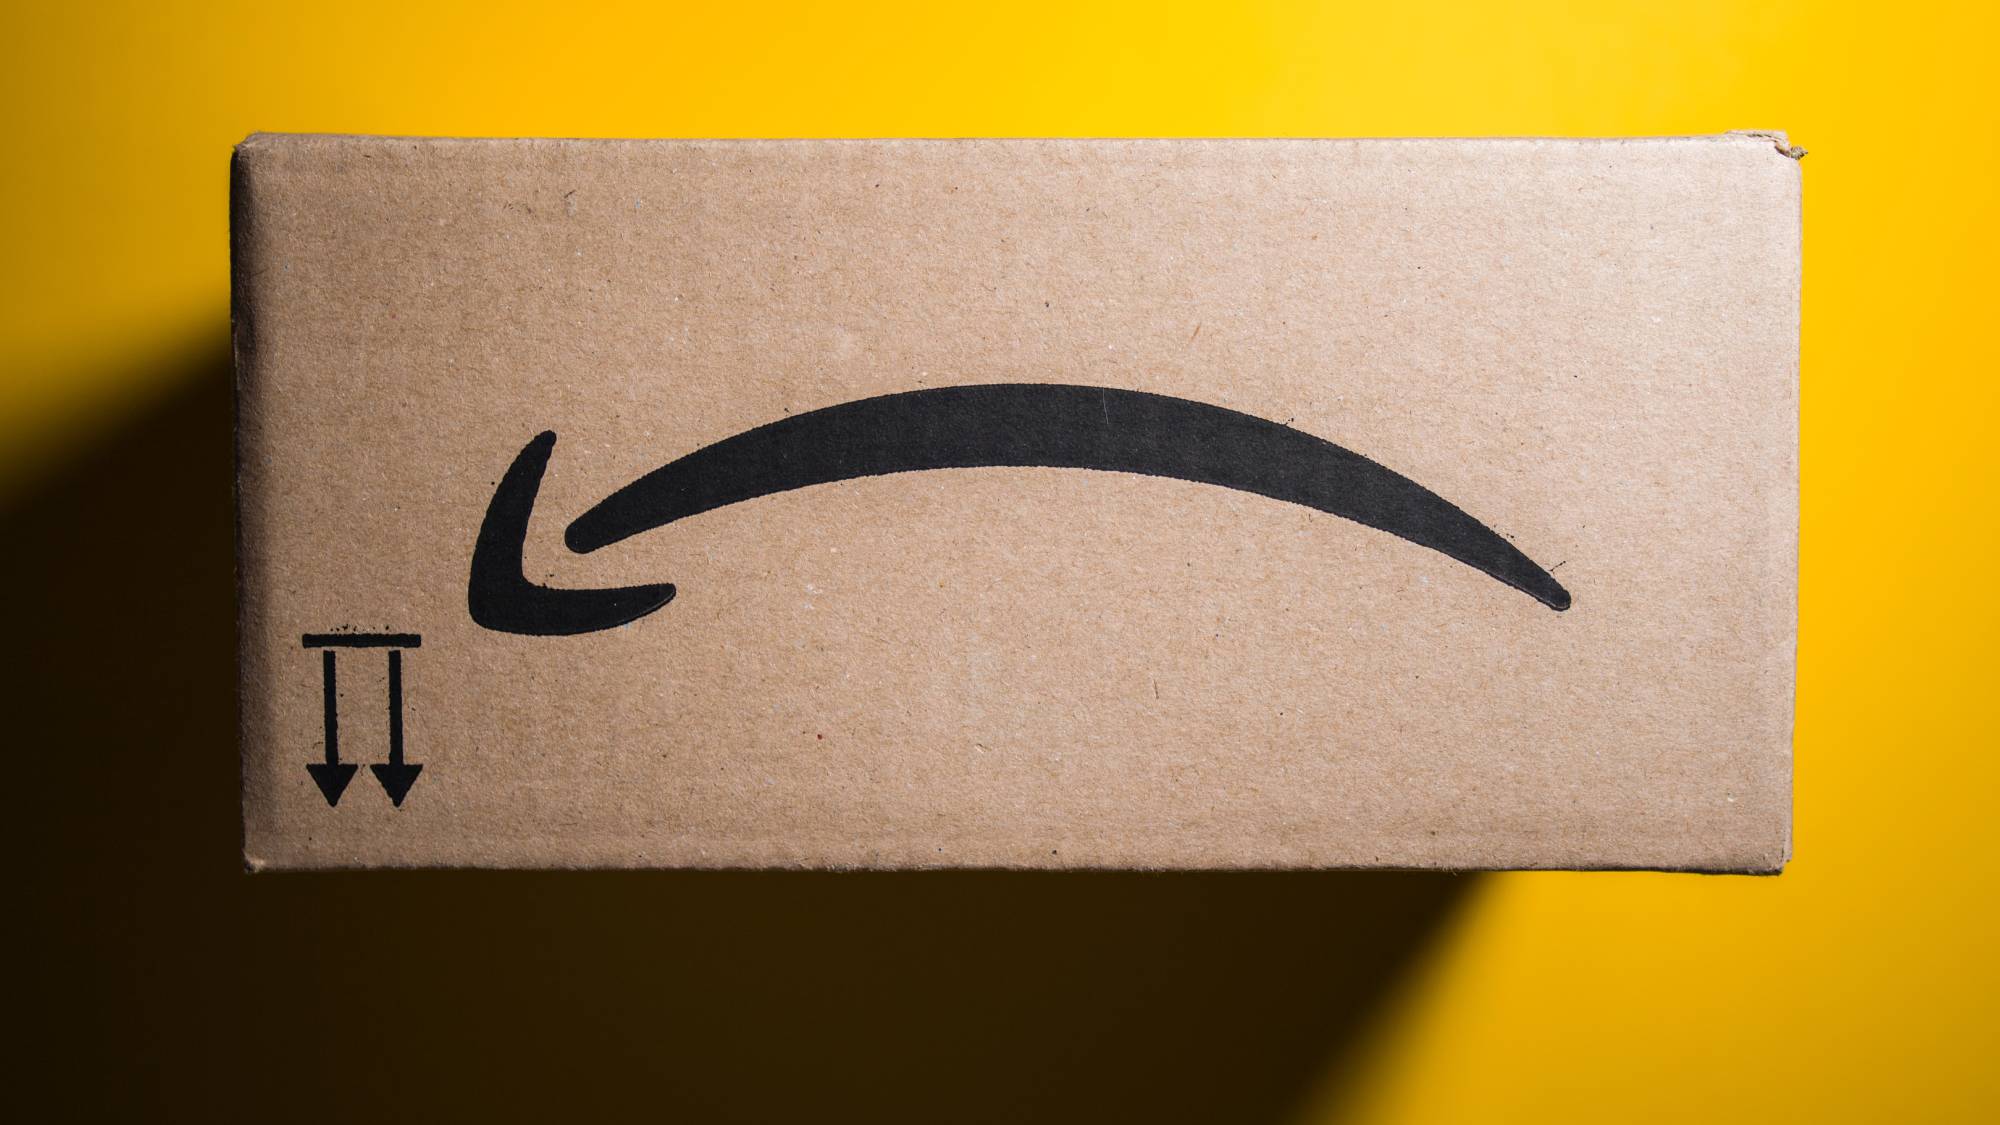 Prime Day 2022: Deals worth taking, 2 you should skip